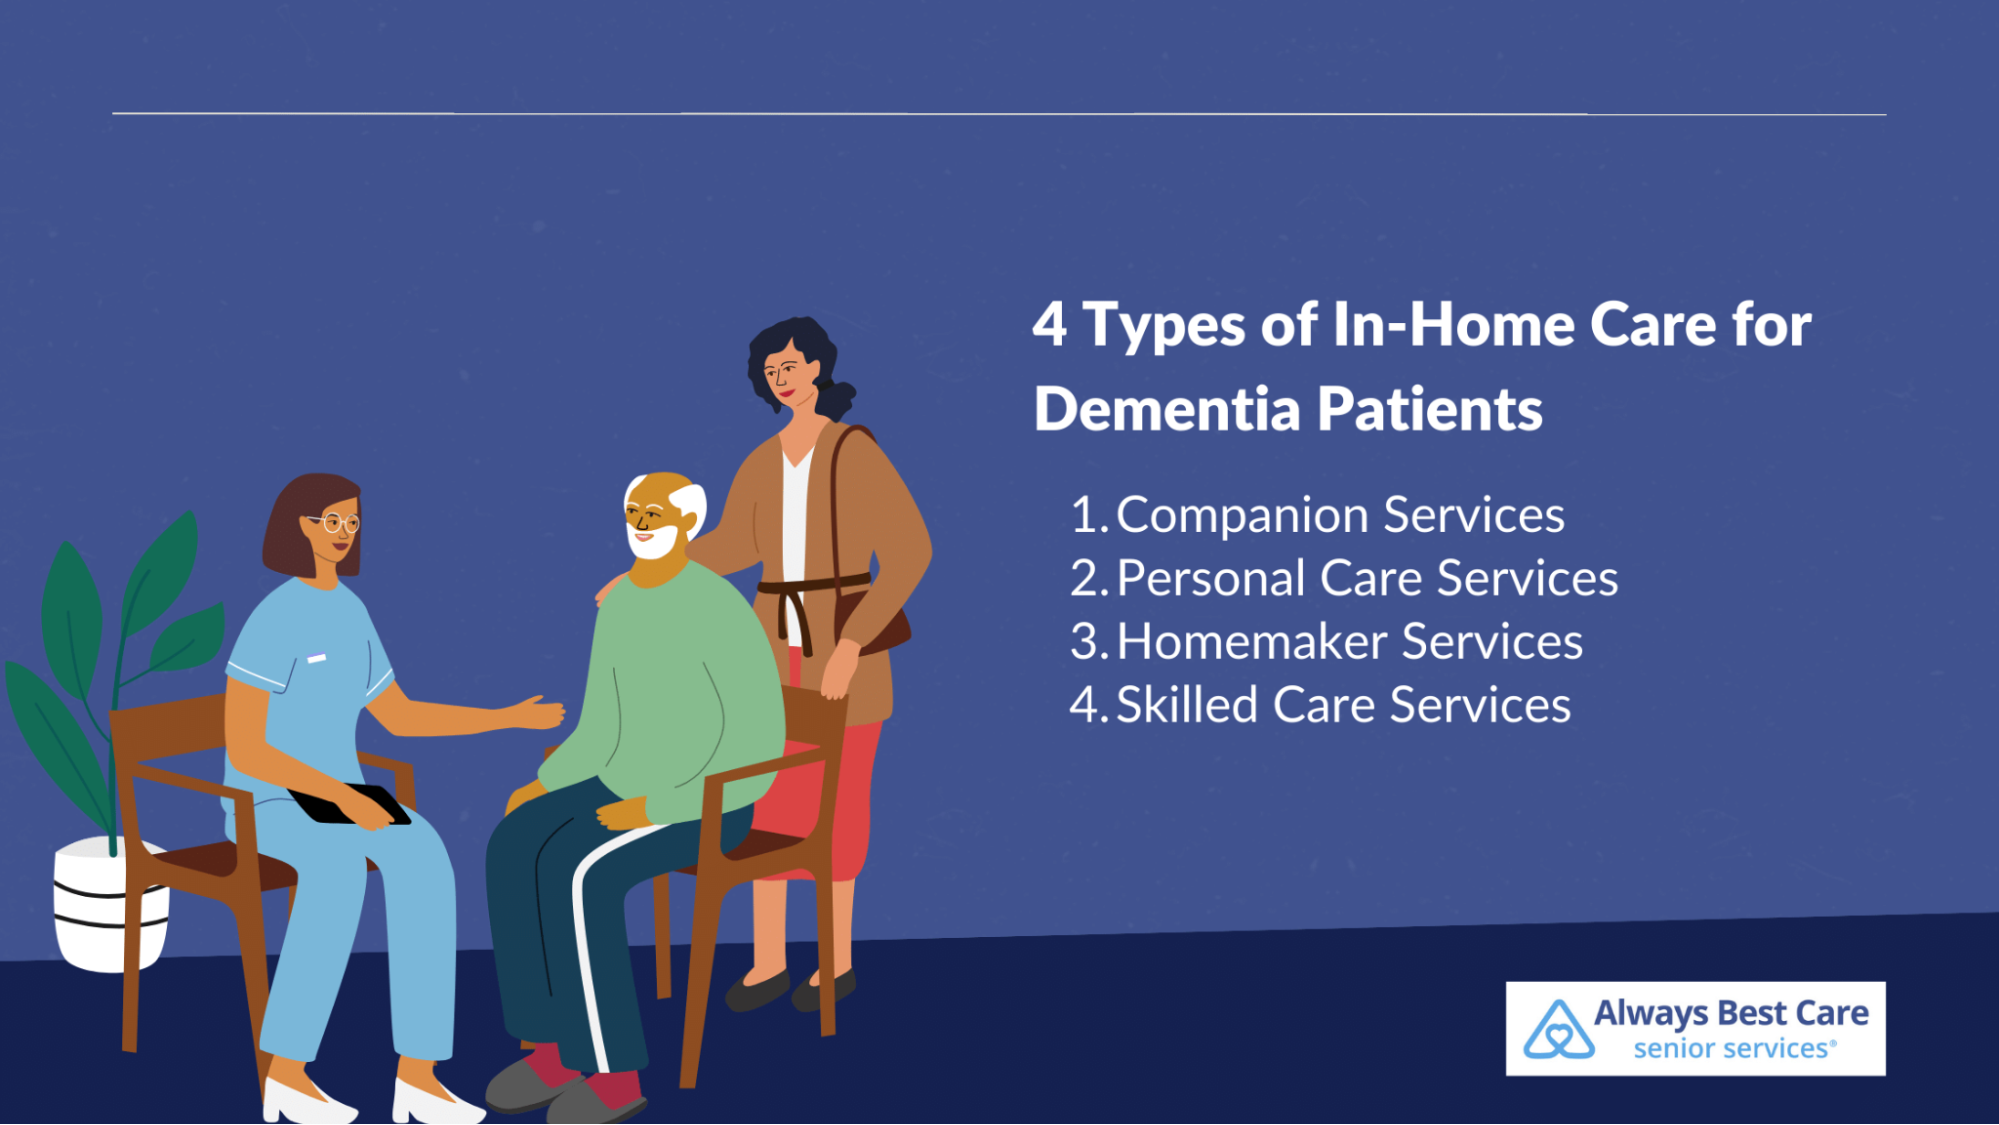 4 Types of In-Home Care for Dementia Patients